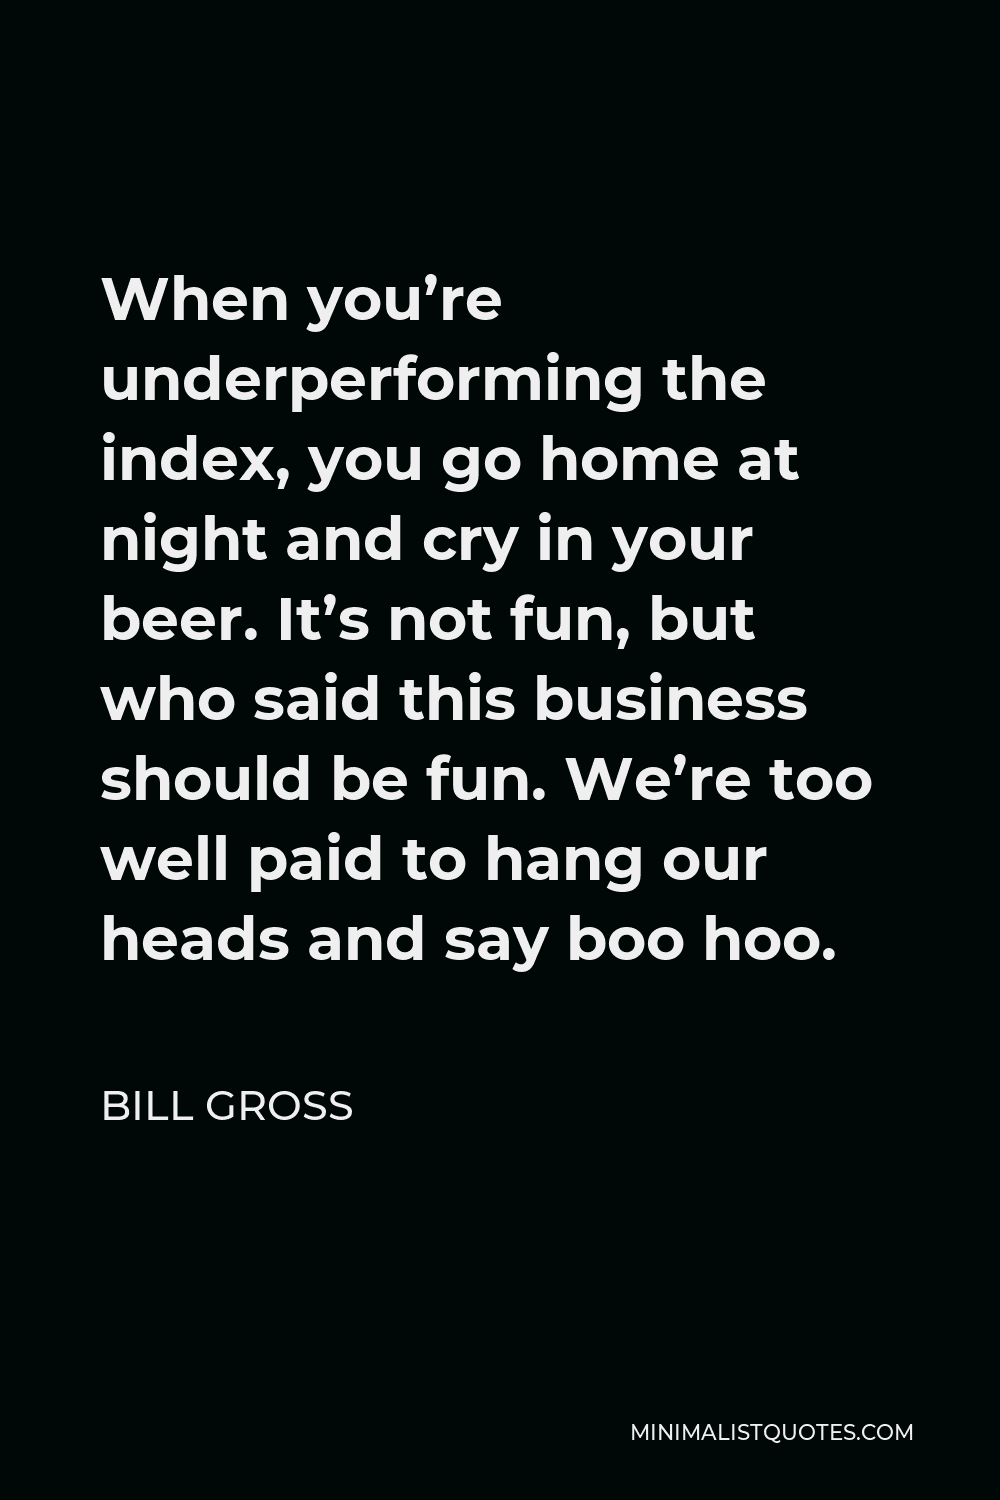 Bill Gross Quote - When you’re underperforming the index, you go home at night and cry in your beer. It’s not fun, but who said this business should be fun. We’re too well paid to hang our heads and say boo hoo.